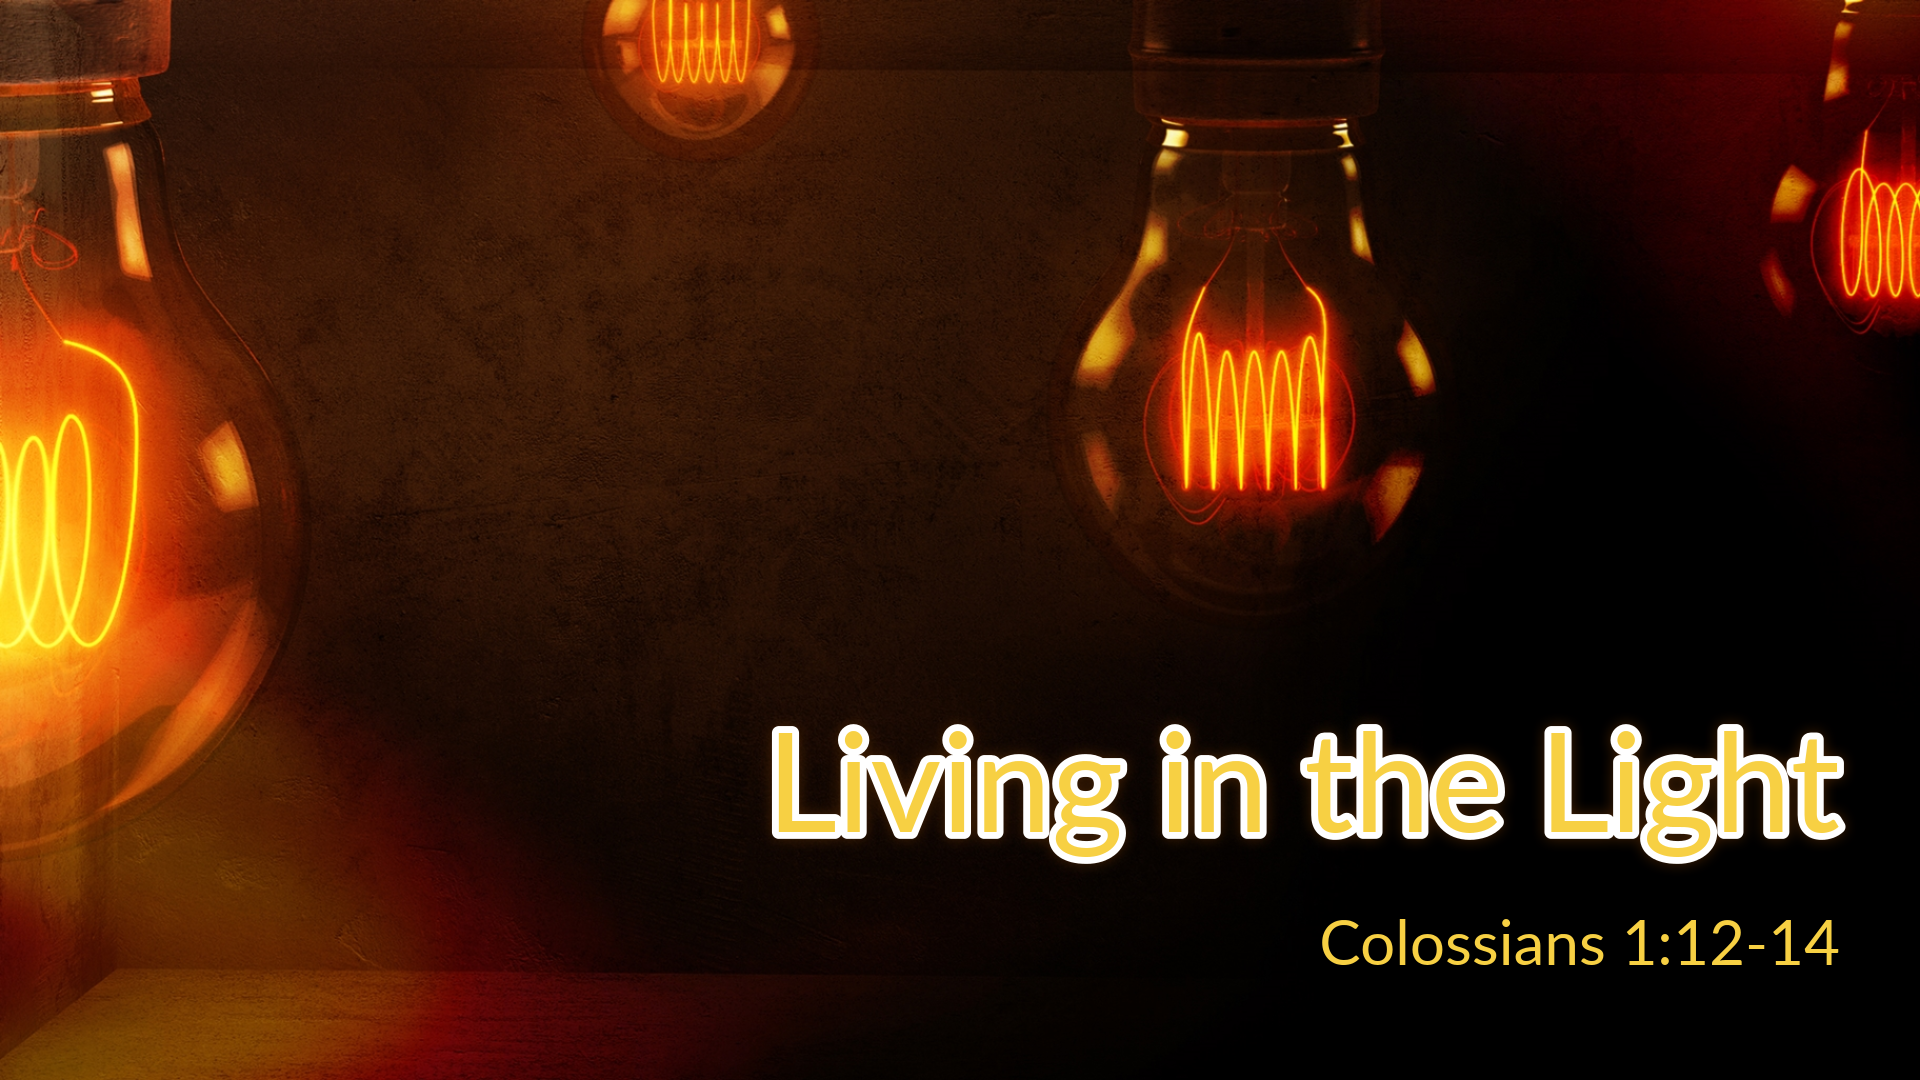 Aug 9, 2020 - Living in the Light (Video) - Colossians 1:12-14